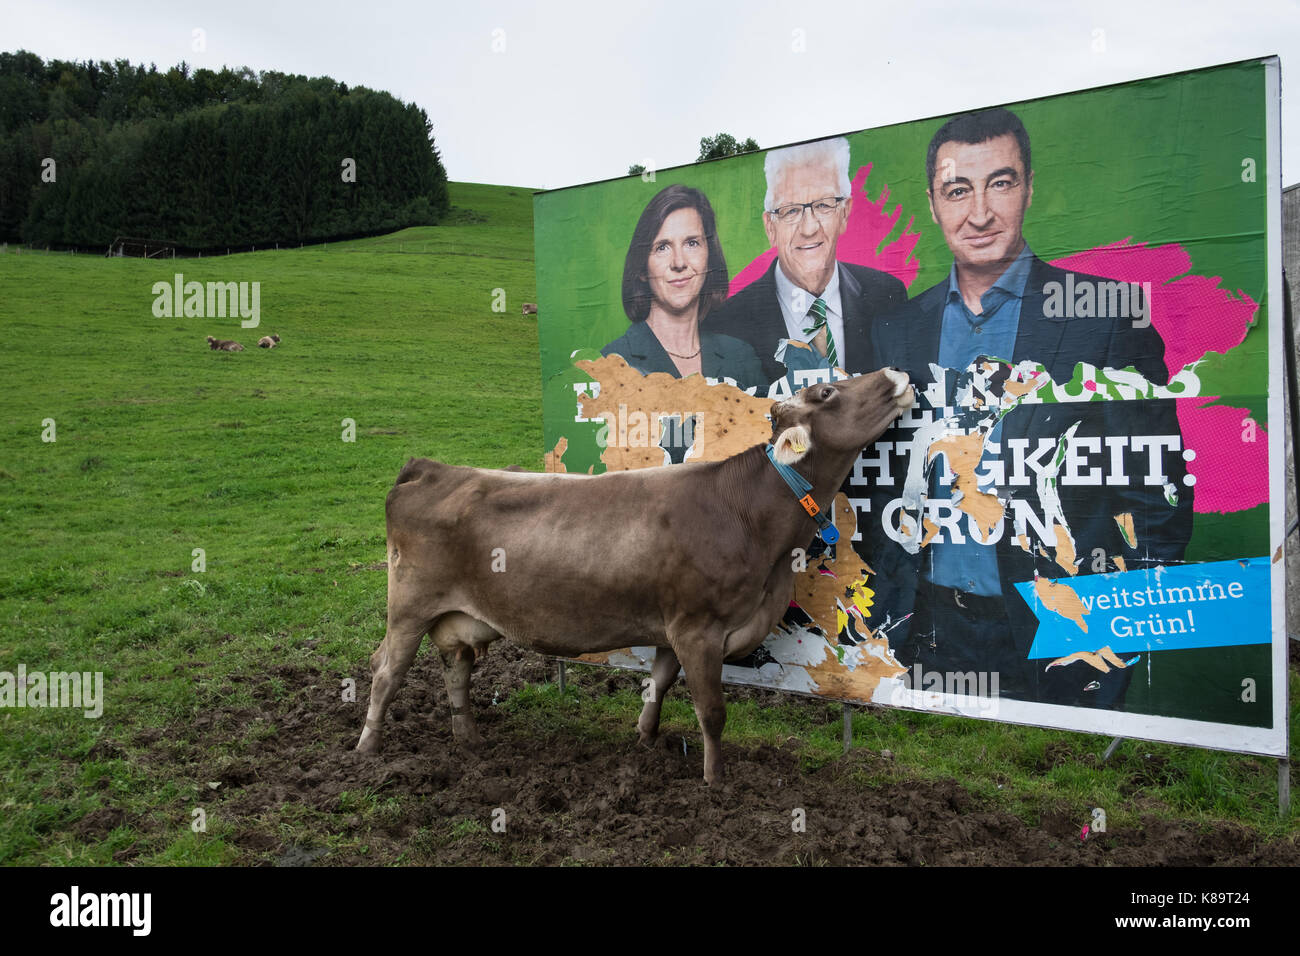 German Federal Elections 2017. A cow is eating The Greens 'Die Grünen' political party campaign poster in a rural region of Allgau , Baden- Wurttemberg. The Green Party is commited to environmental, ecological, economic, and social issues. On the poster from left: Katrin Göring-Eckardt, Winfried Kretschmann, Cem Özdemir. Stock Photo